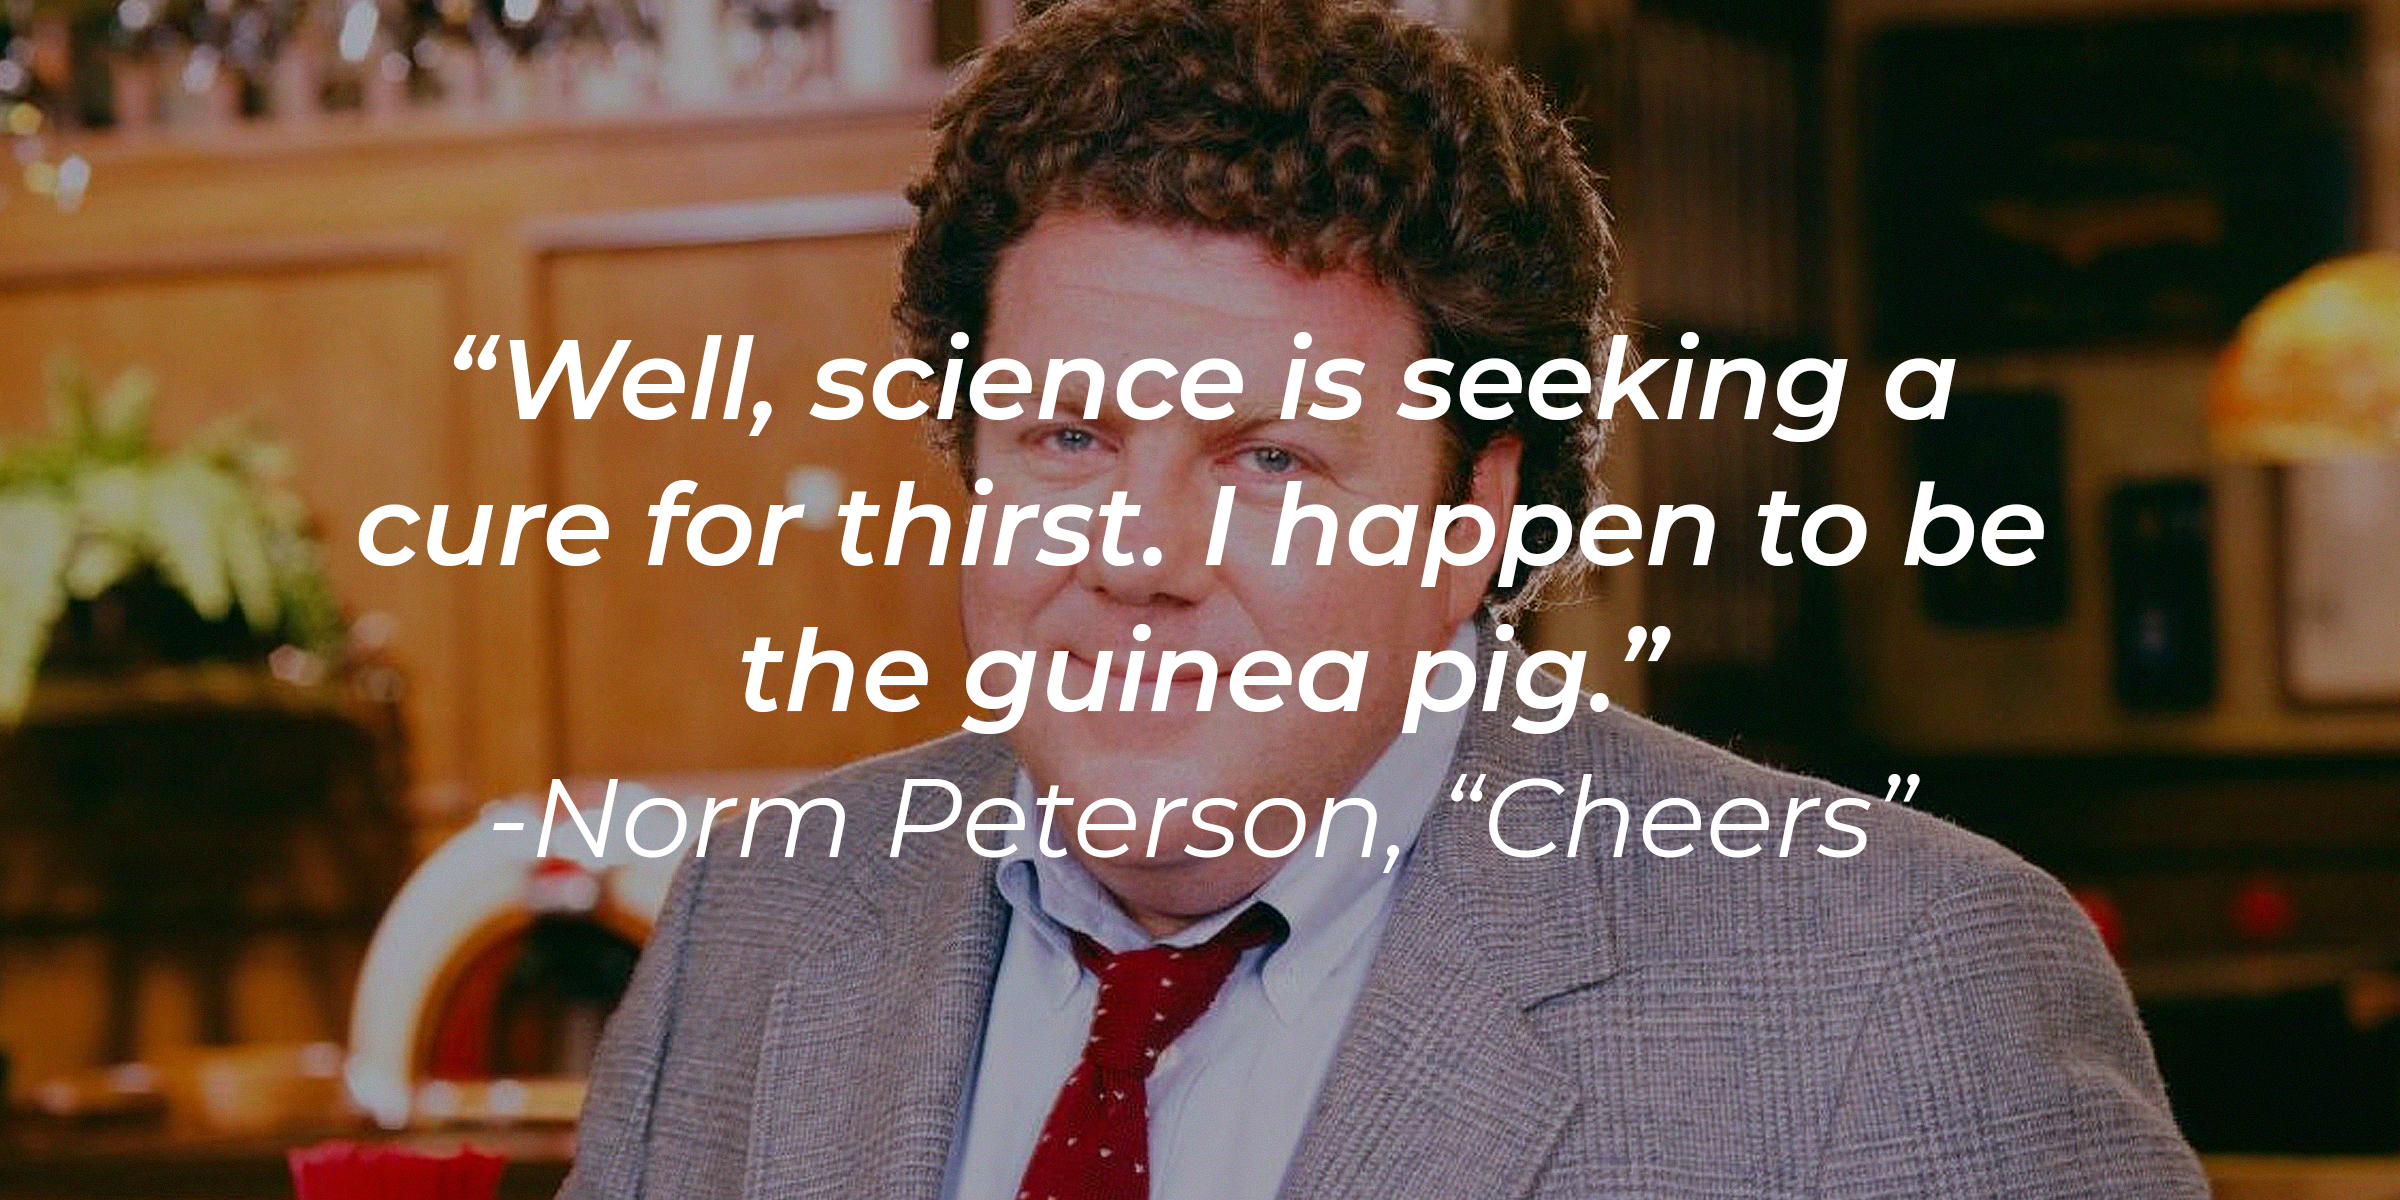 Norm Peterson with his quote: "Well, science is seeking a cure for thirst. I happen to be the guinea pig." | Source: Facebook.com/Cheers